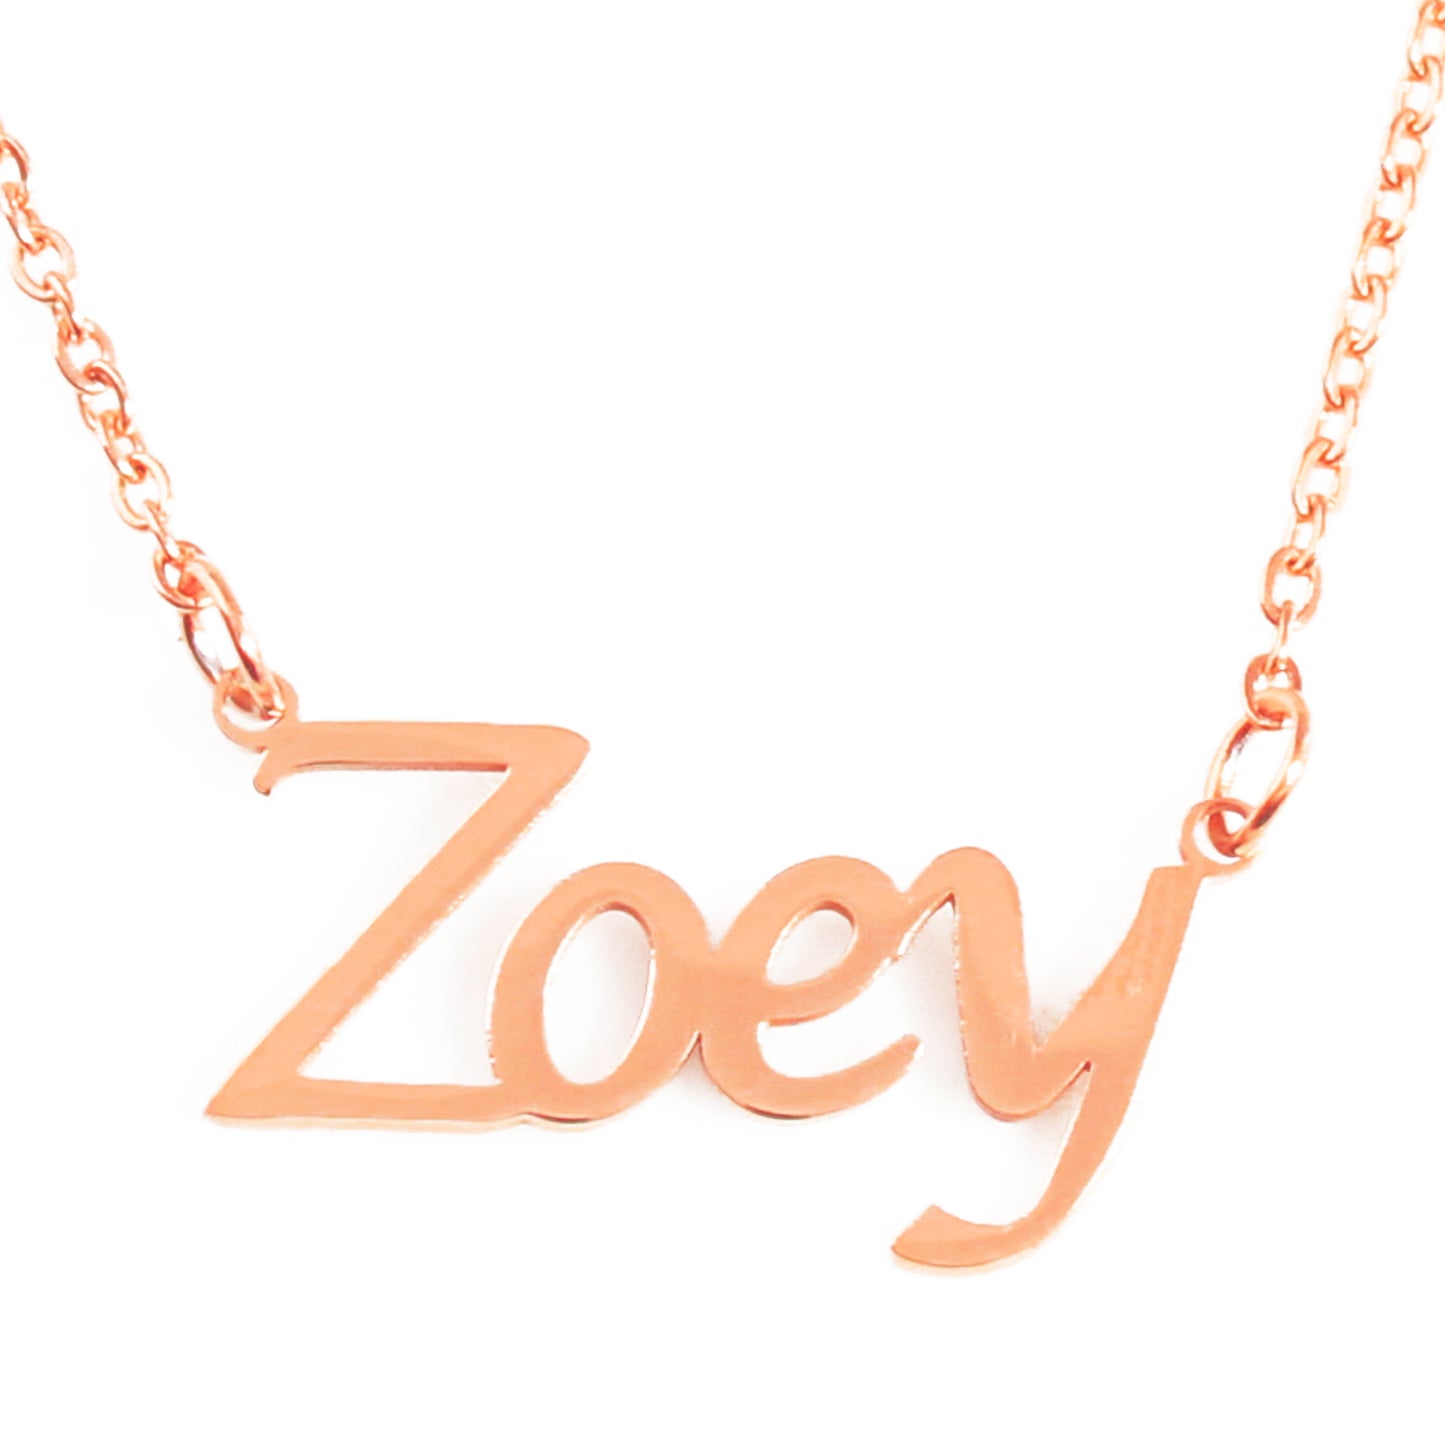 Zoey Name Necklace